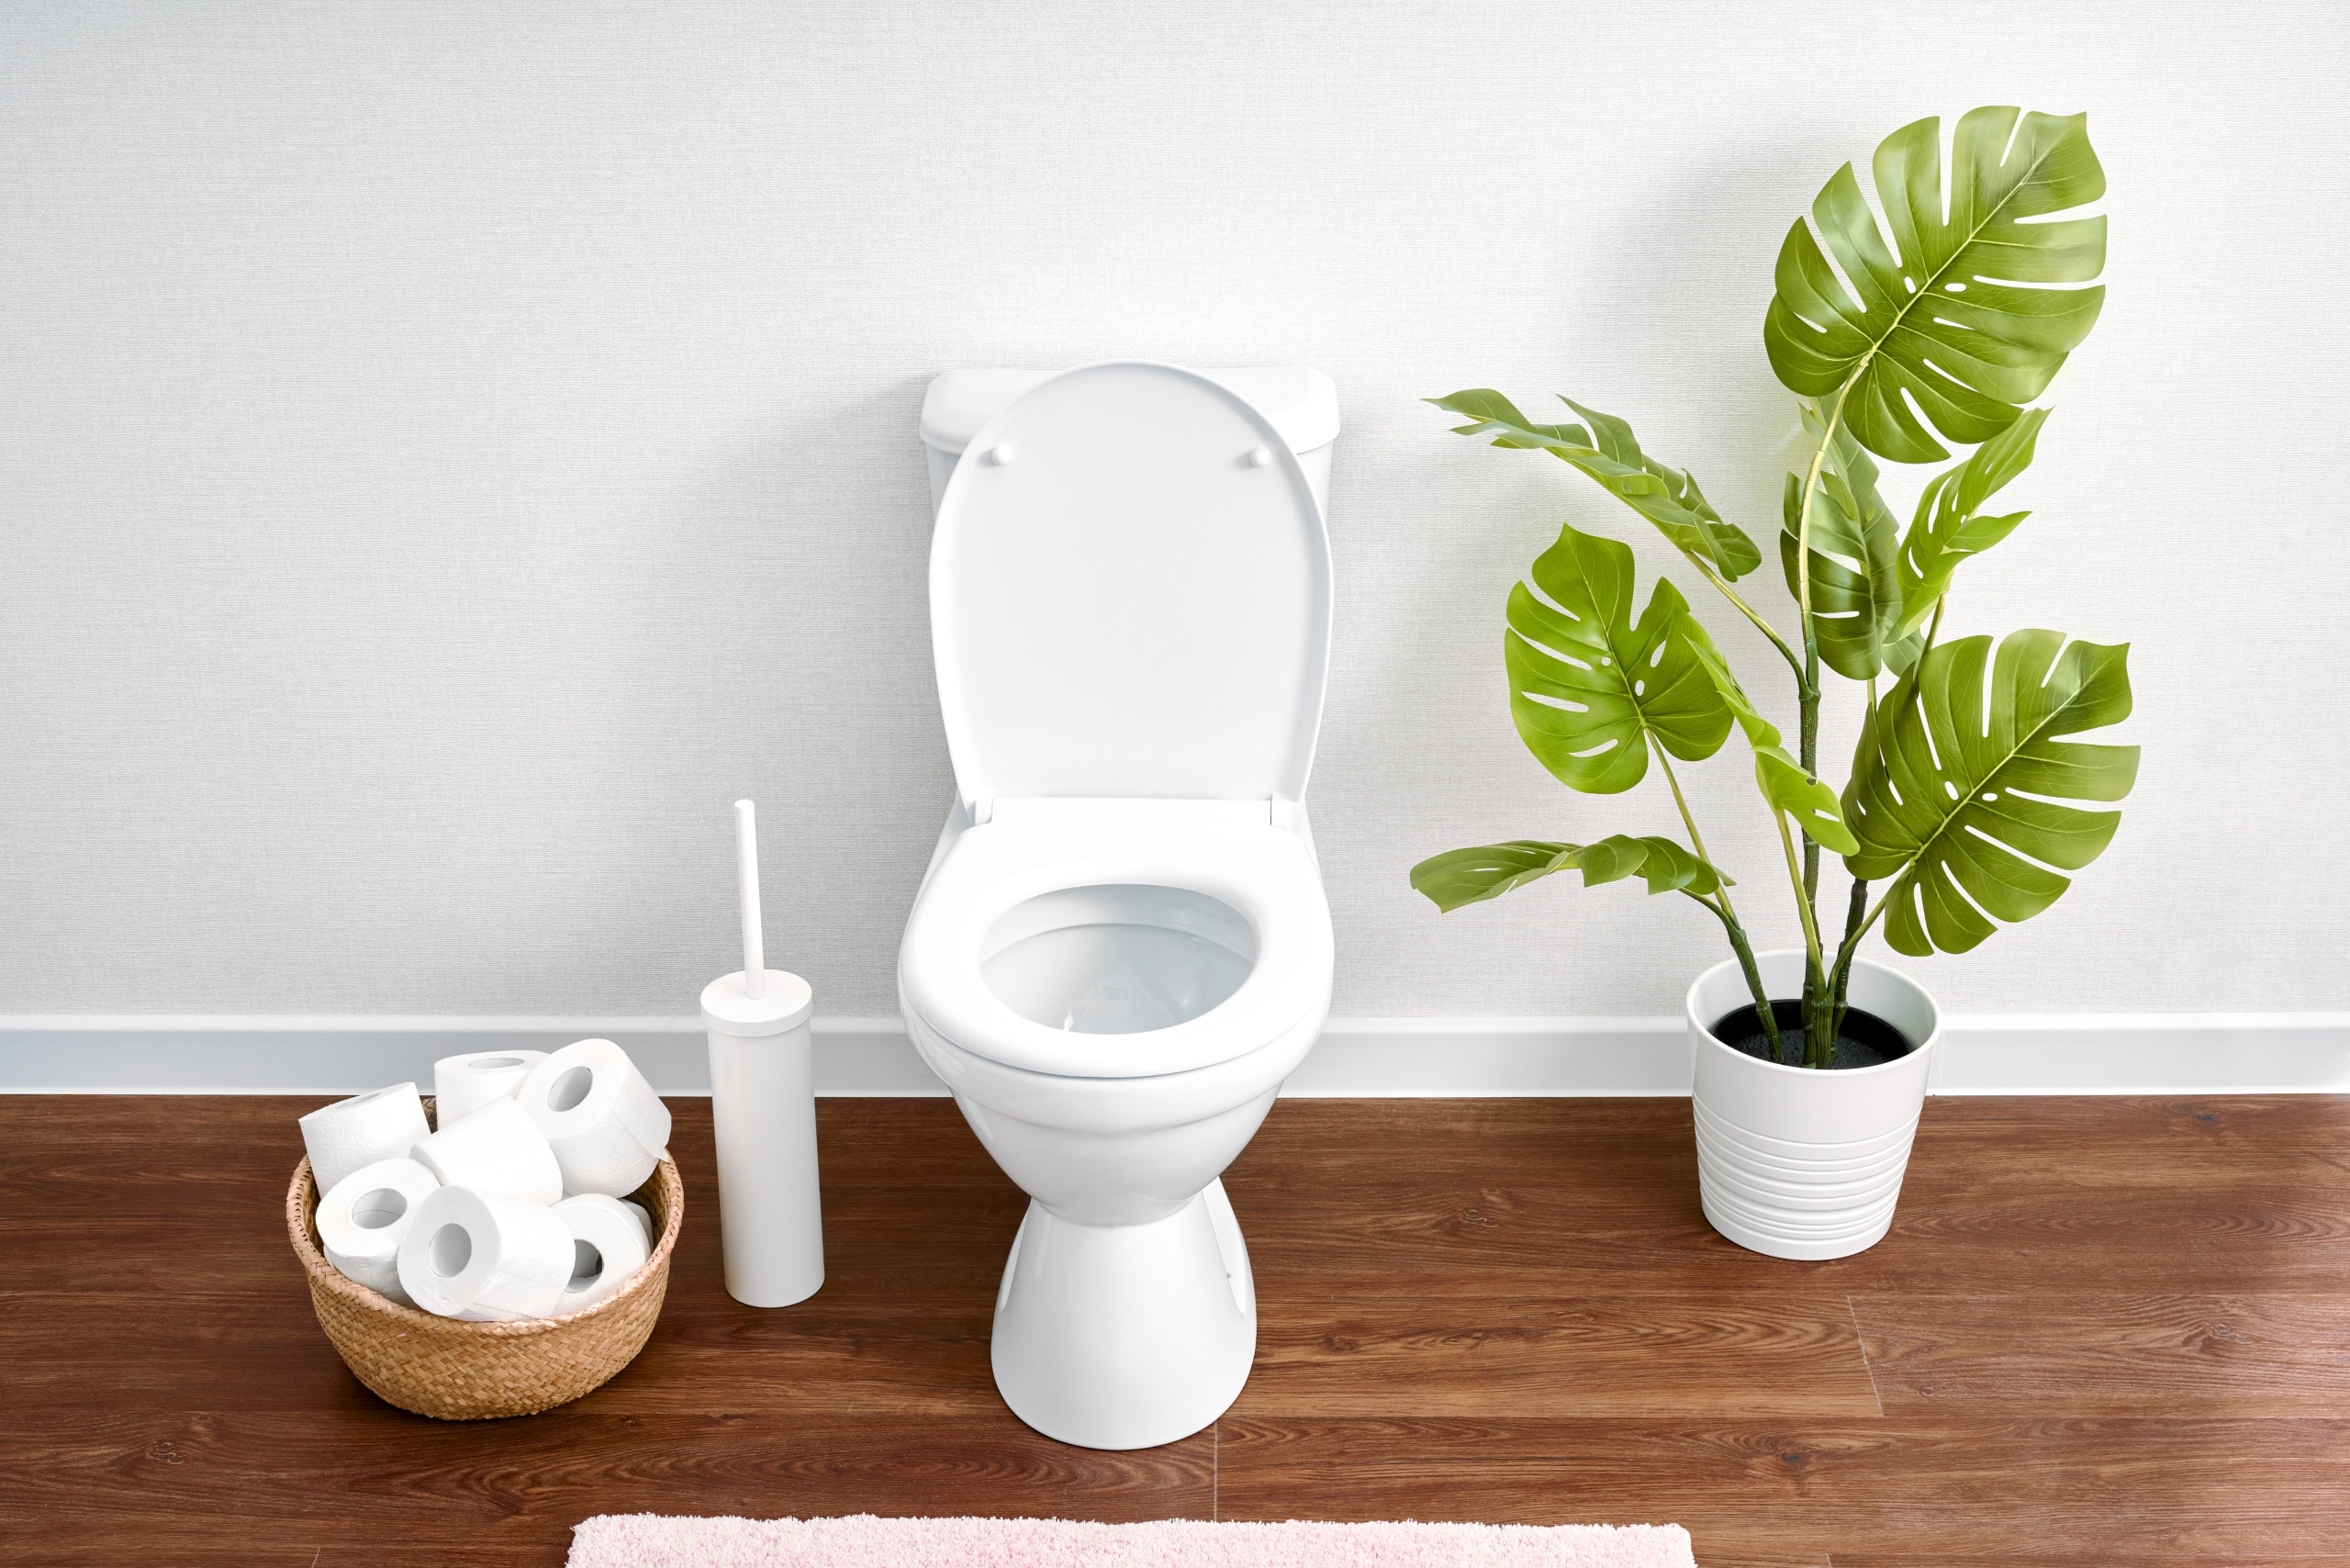 A toilet with basket of toilet paper, toilet wand, and plant nearby. Avoid clogged toilets by only flushing 3 ps.